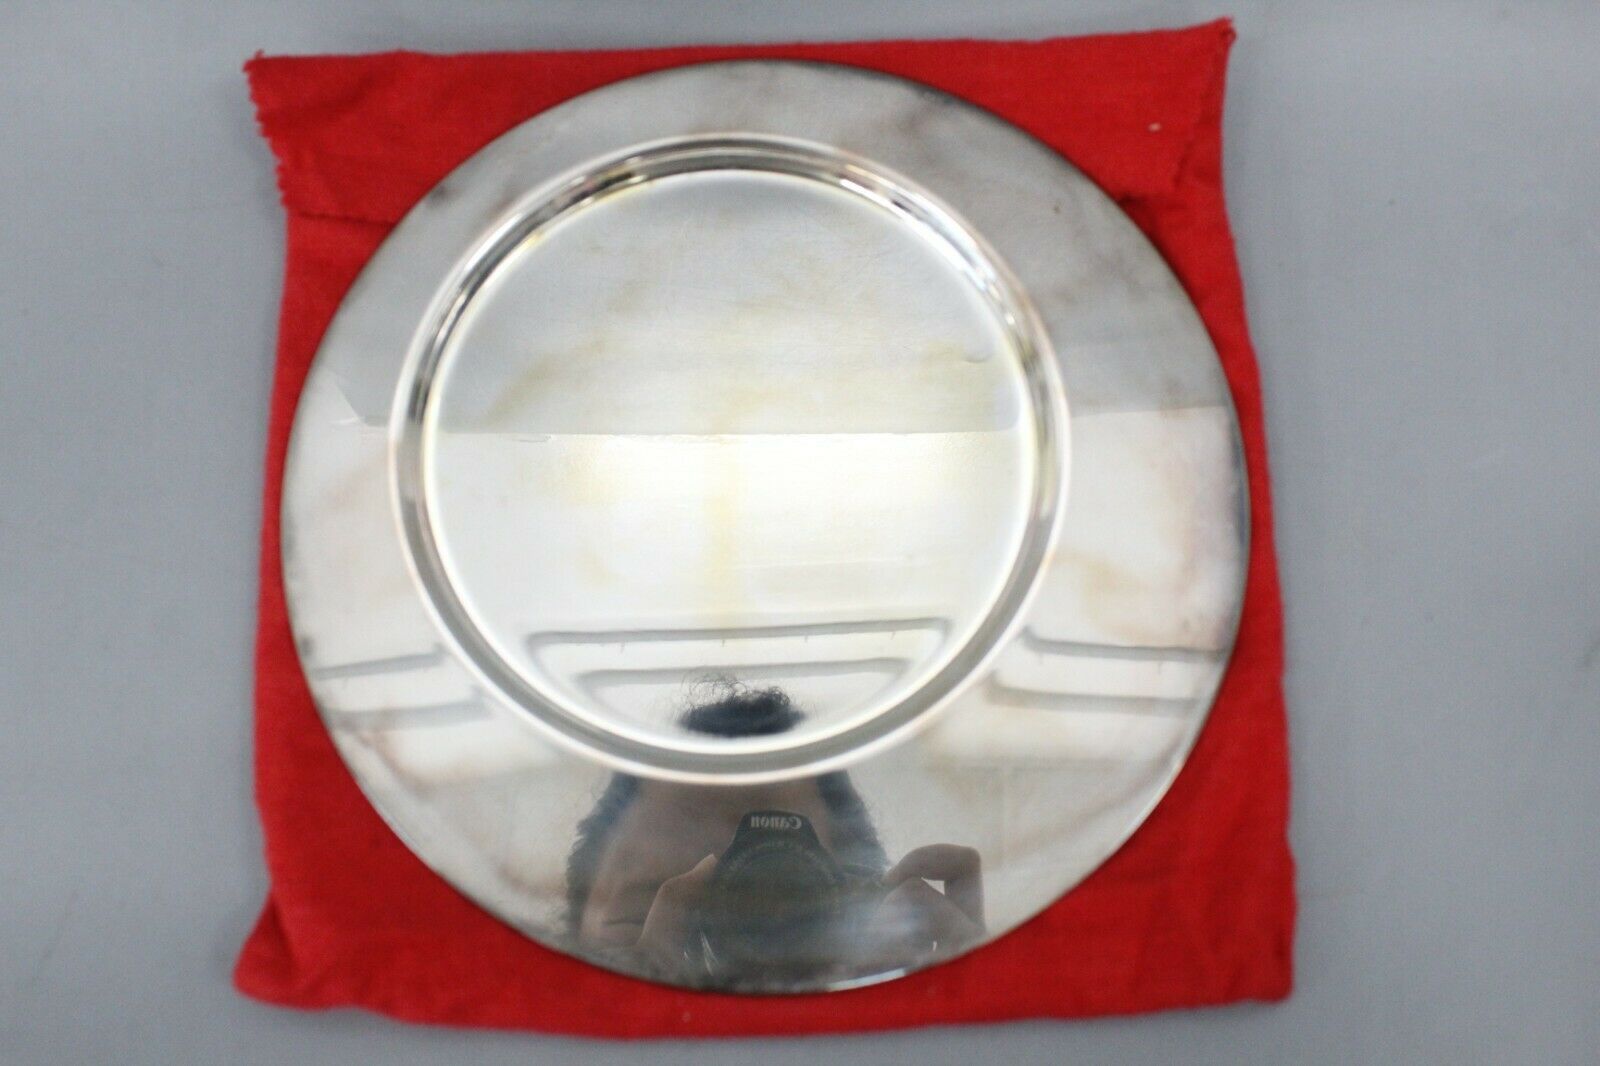 Gio Ponti For Cleto Munari Vintage Modernist Silver Plated Plate 8 7/8"